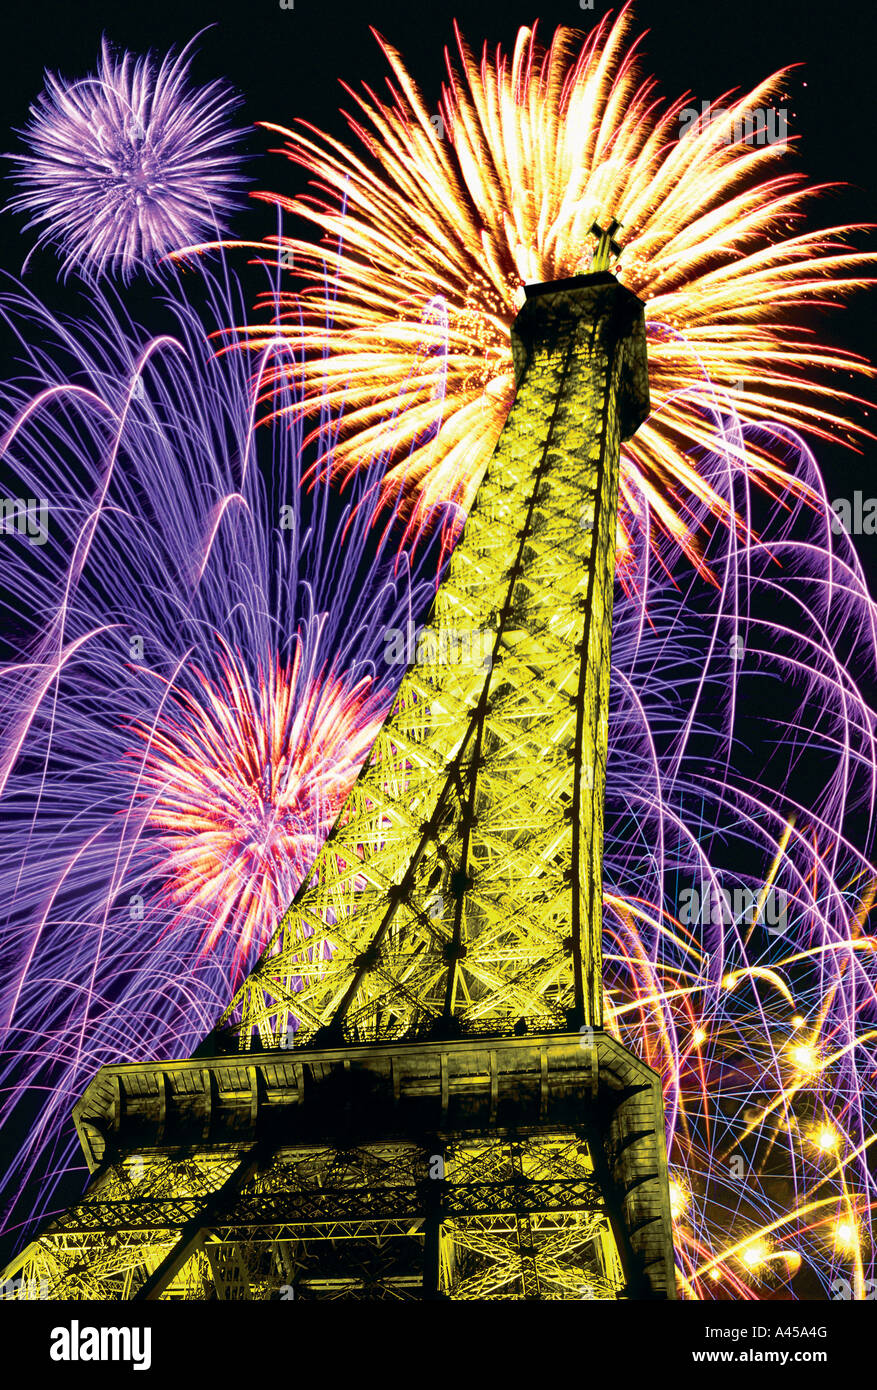 Eiffel tower at night with fireworks Stock Photo